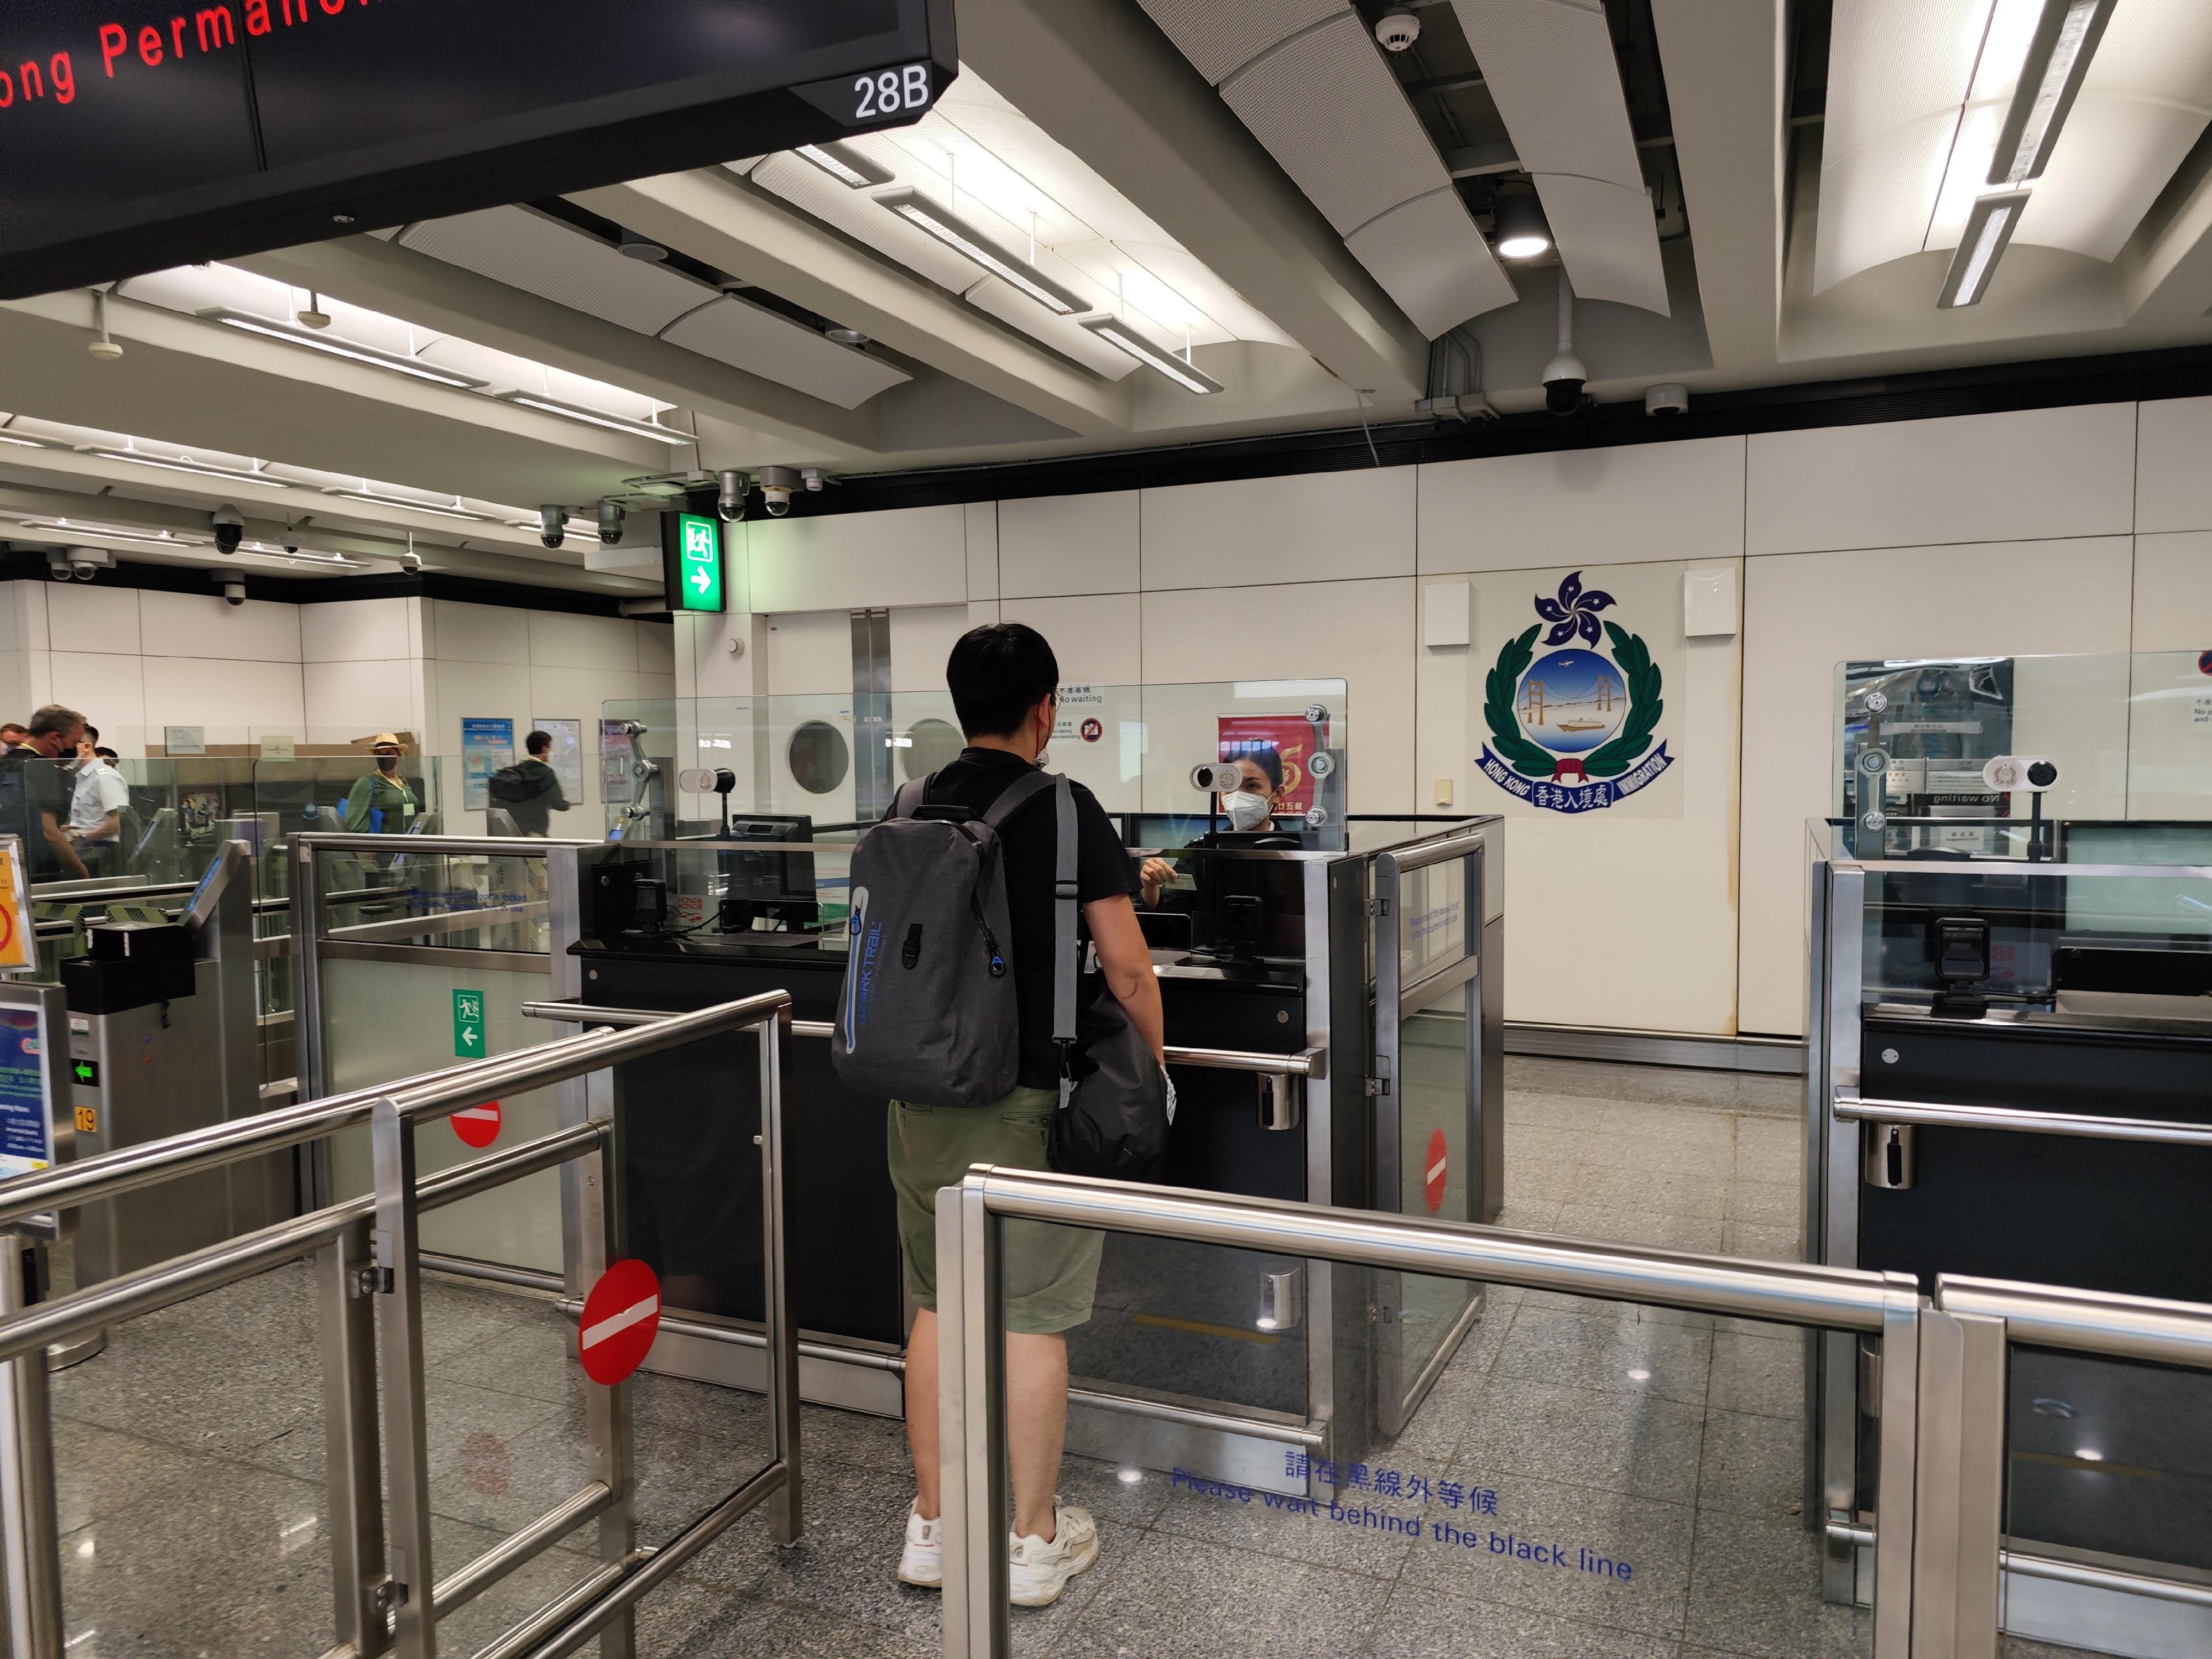 An assistance seeker safely arrived at Hong Kong International Airport today (August 28). Photo shows Immigration staff assisting the concerned assistance seeker to go through immigration clearance at a designated counter.